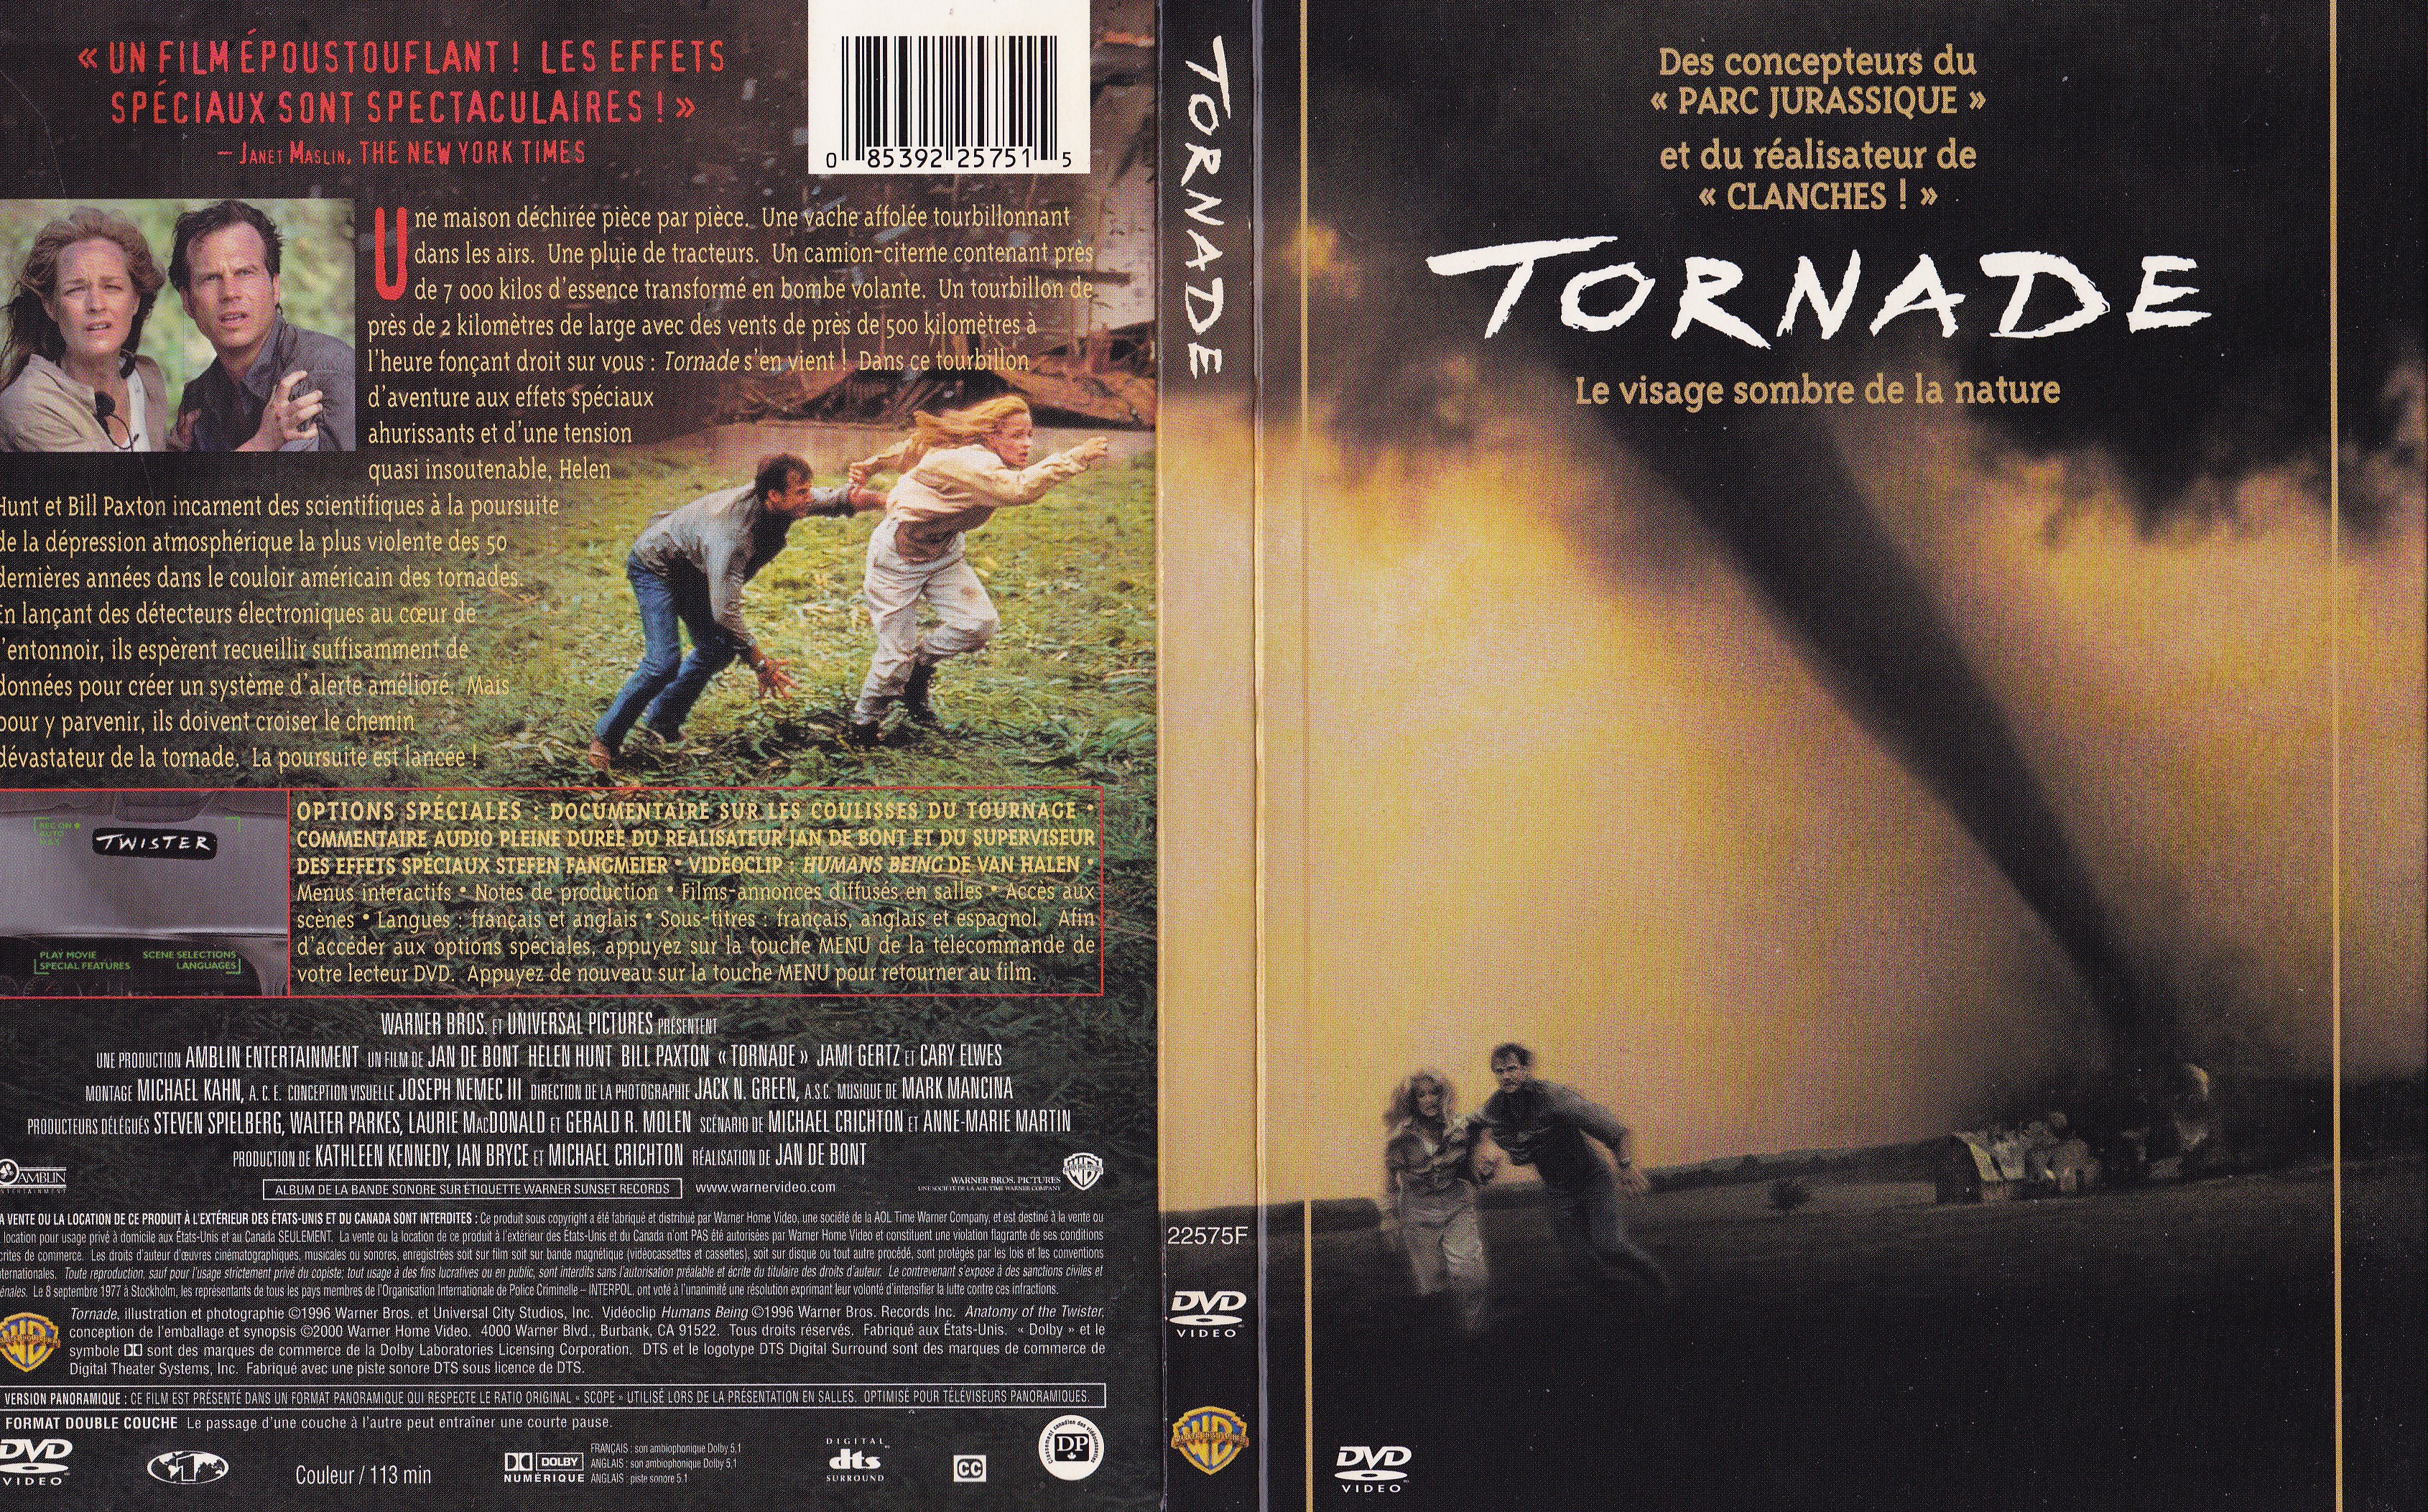 Jaquette DVD Tornade - Twister (Canadienne)